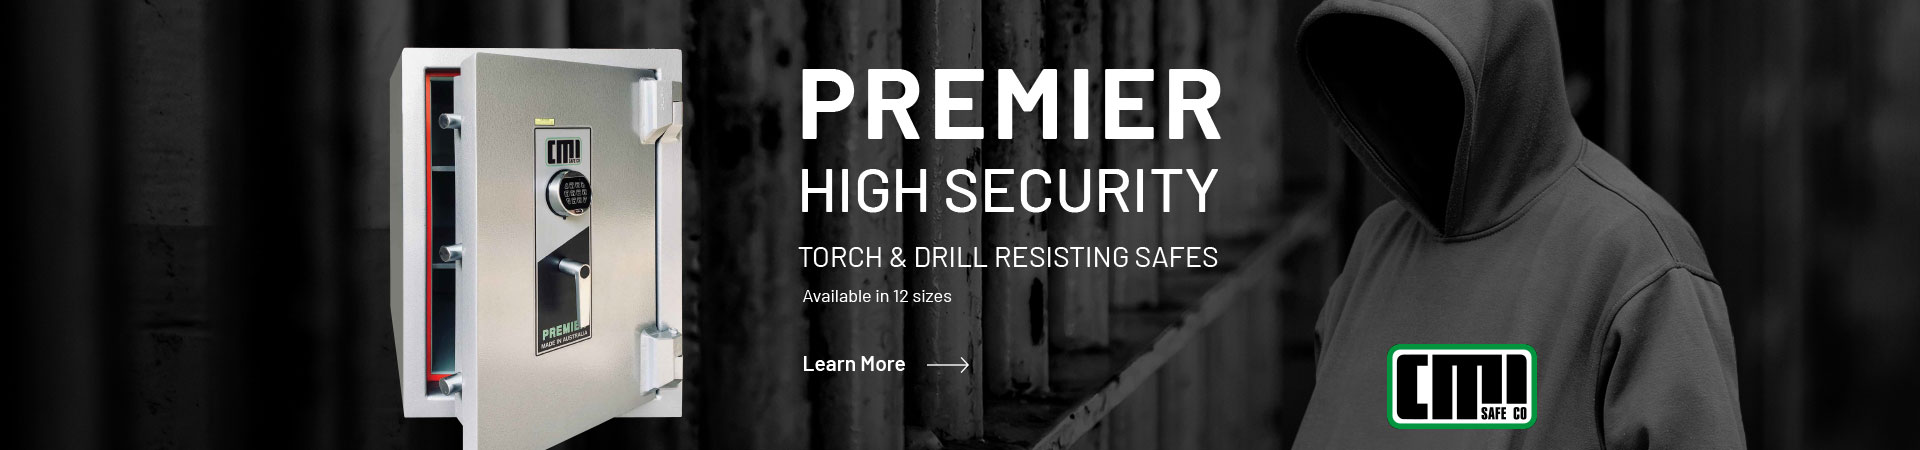 View our Premier Torch & Drill resistant safe